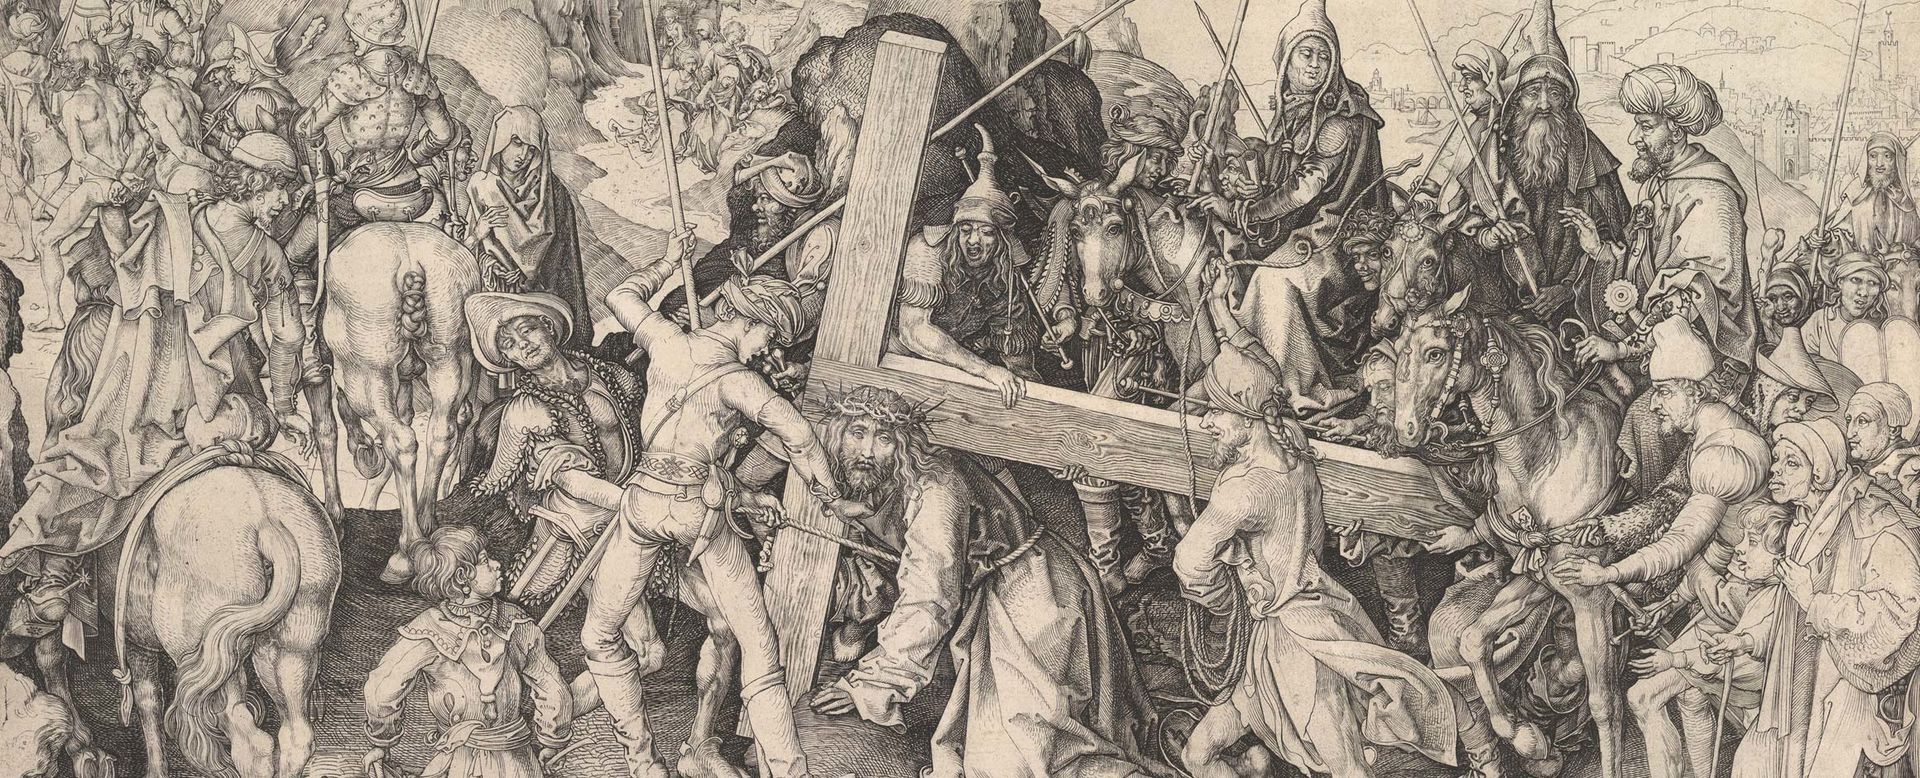 Engraving by Martin Schongauer depicting Christ carrying the Cross amid a throng of onlookers